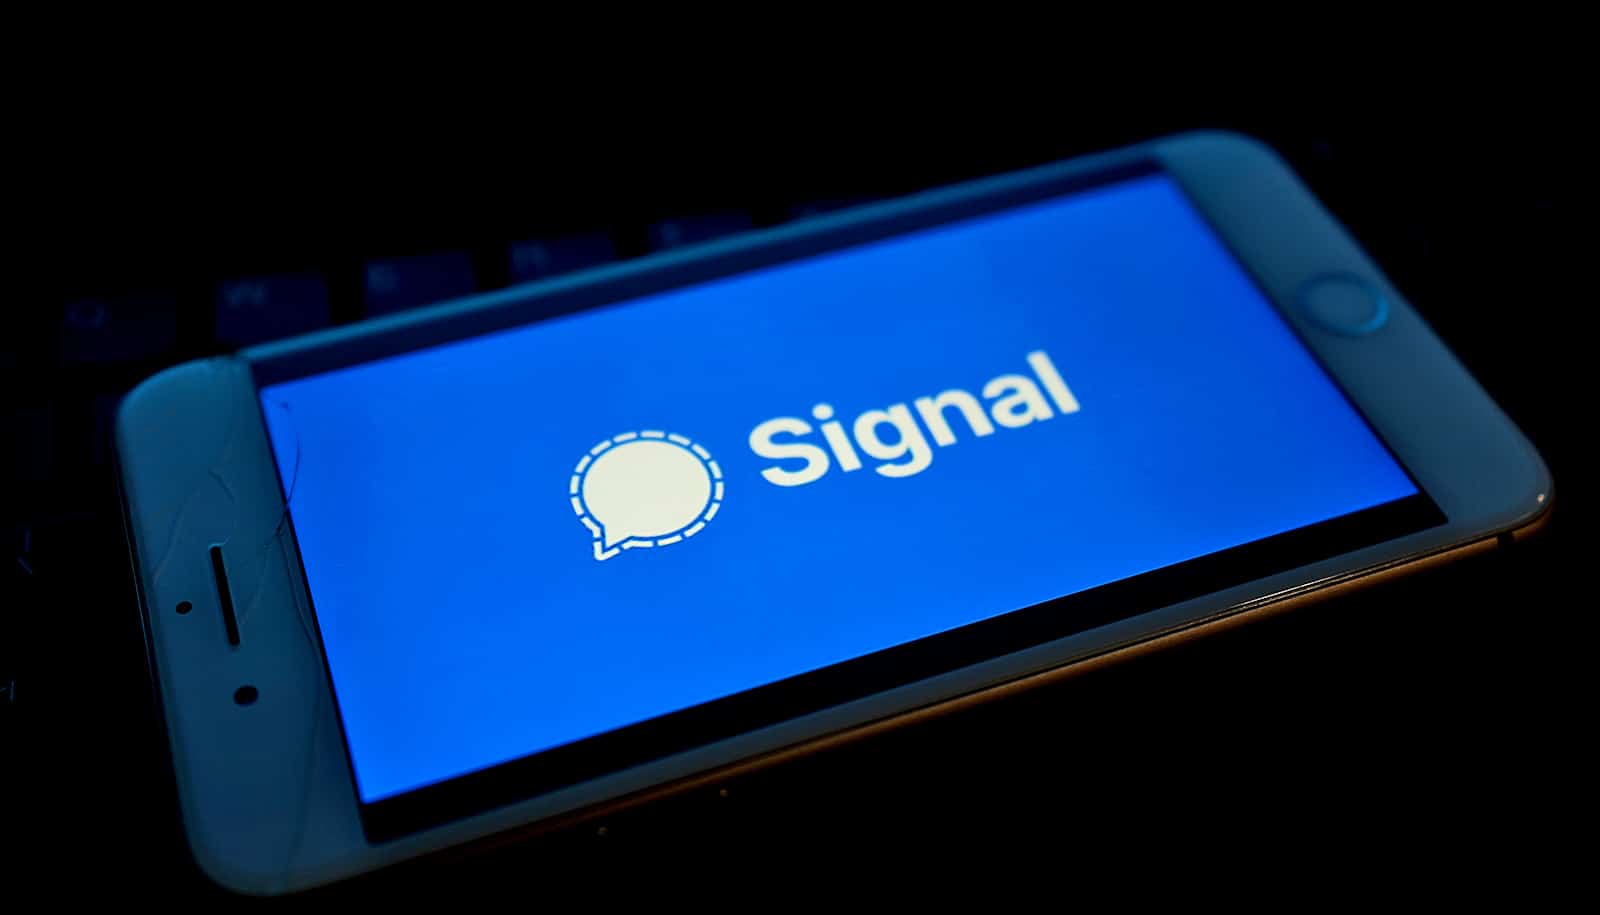 Can encrypted apps like Signal also moderate abuse? - Futurity